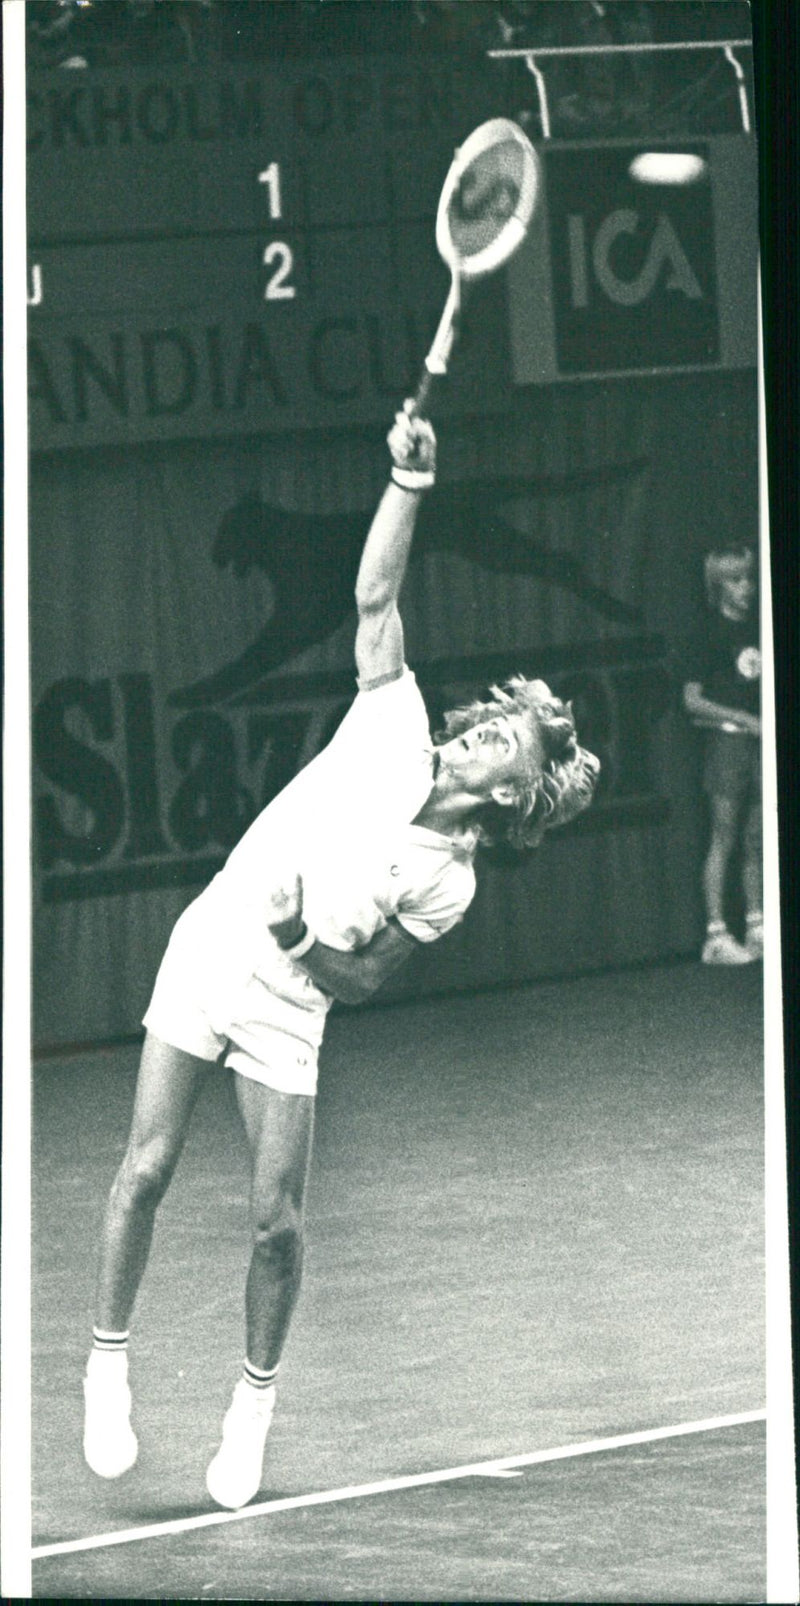 Björn Borg in action - Vintage Photograph